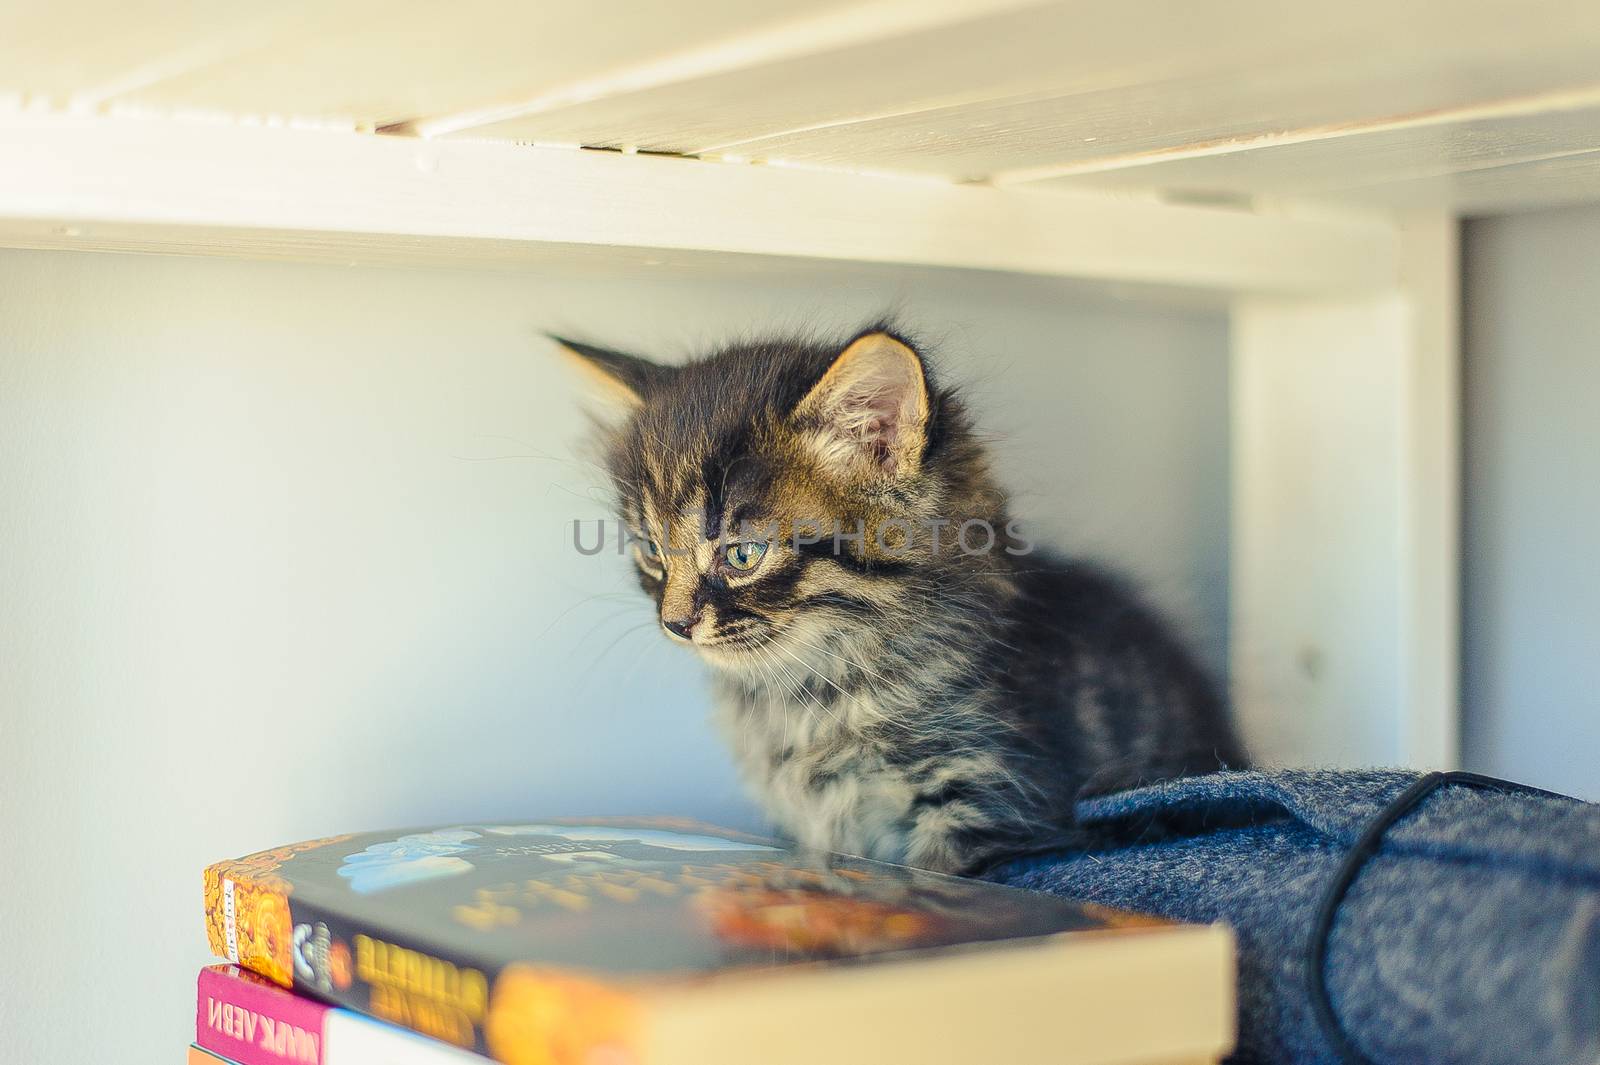 gray kitten with stripes sits on a bookshelf